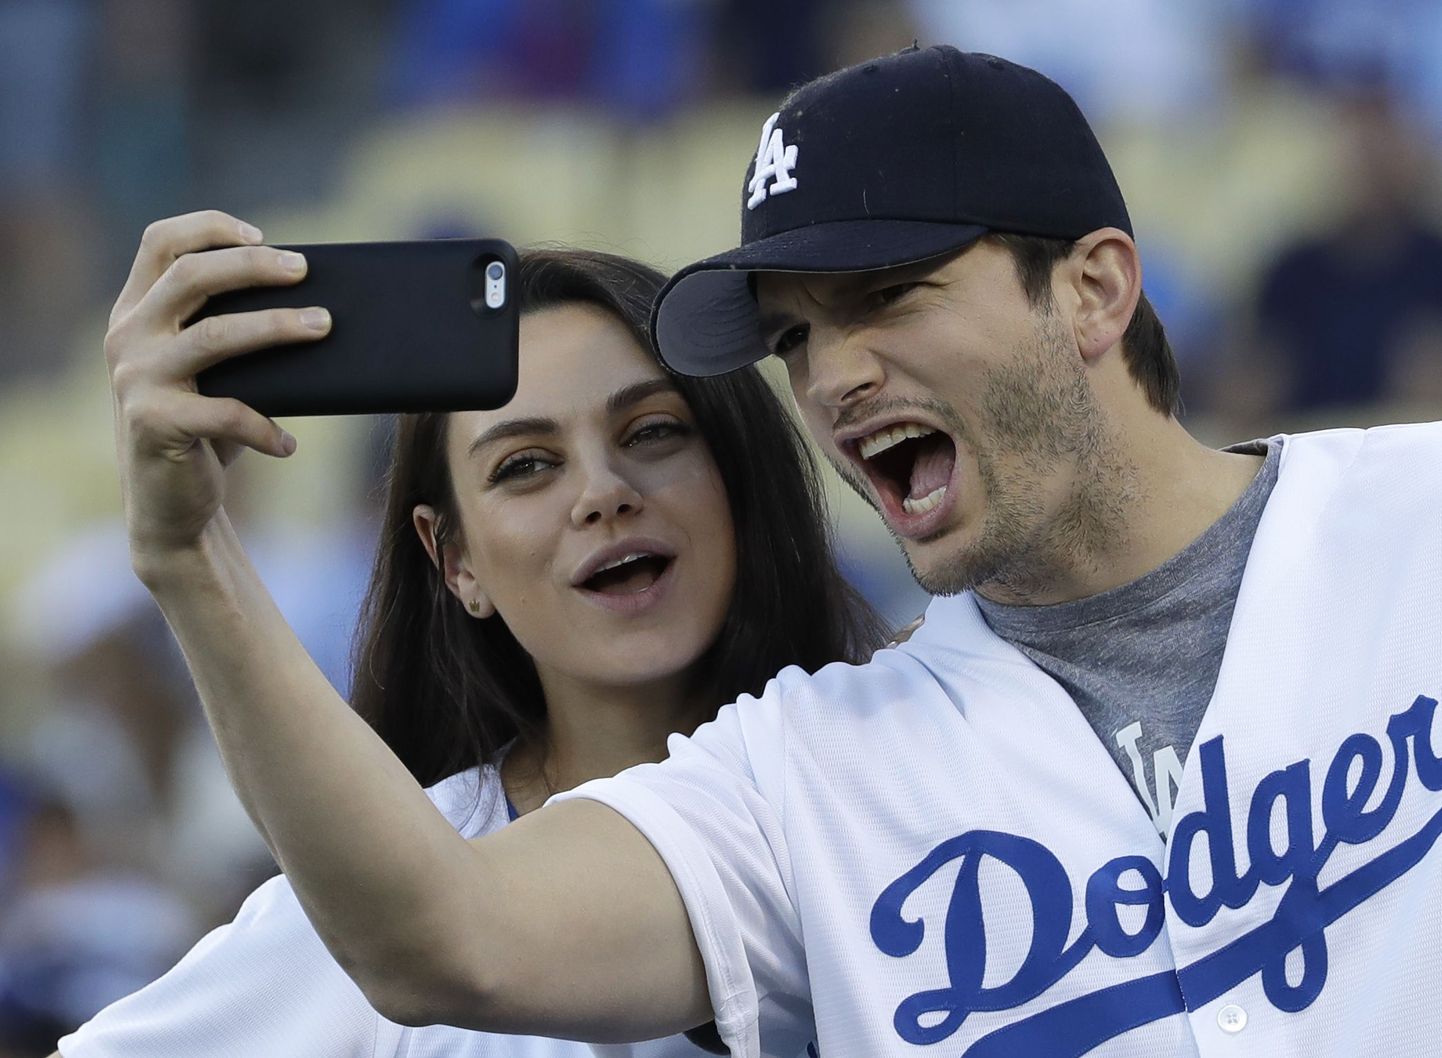 FILE- In this Oct. 19, 2016, file photo, Ashton Kutcher and wife Mila Kunis take a selfie before Game 4 of the National League baseball championship series between the Chicago Cubs and the Los Angeles Dodgers in Los Angeles. Kunis and Kutcher are parents for the second time. A publicist for the actress said in an email Thursday, Dec. 1, that Kunis had given birth. (AP Photo/David J. Phillip, File)